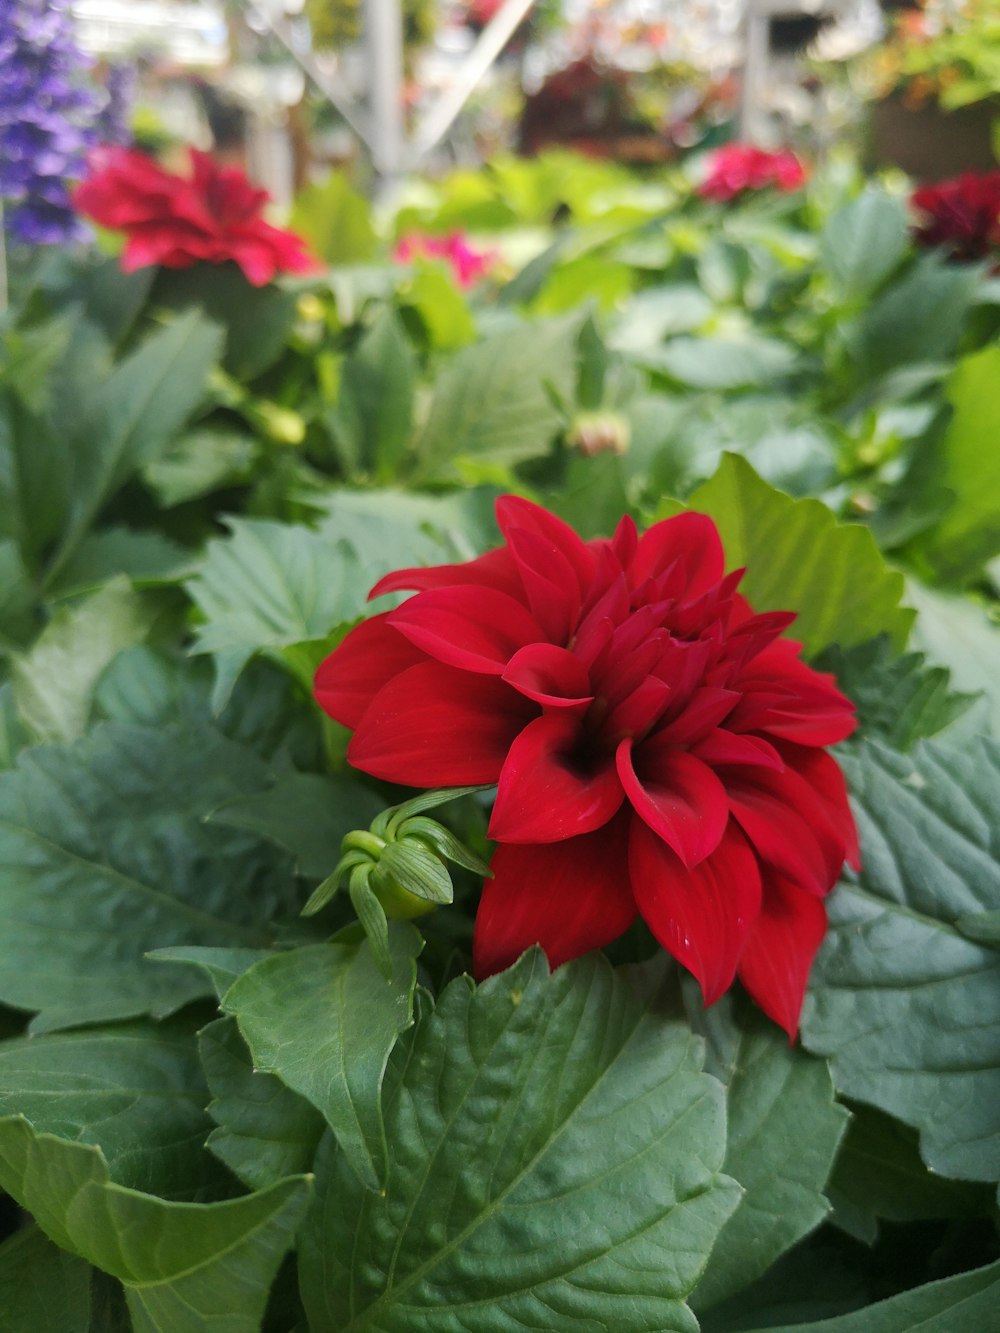 a red flower in a garden filled with lots of green leaves